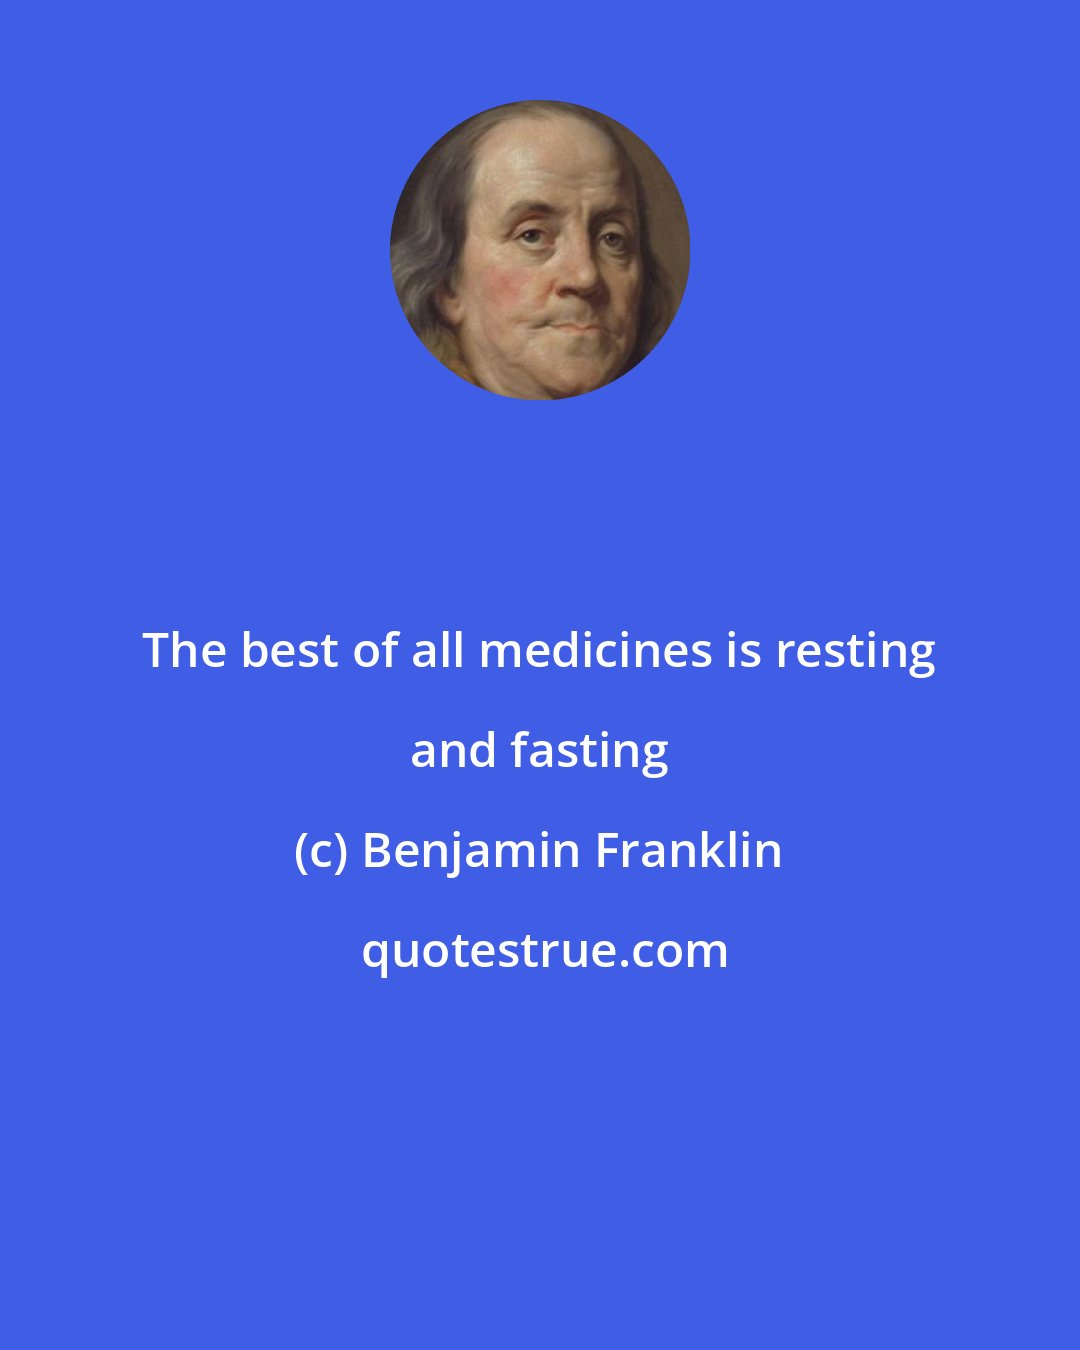 Benjamin Franklin: The best of all medicines is resting and fasting